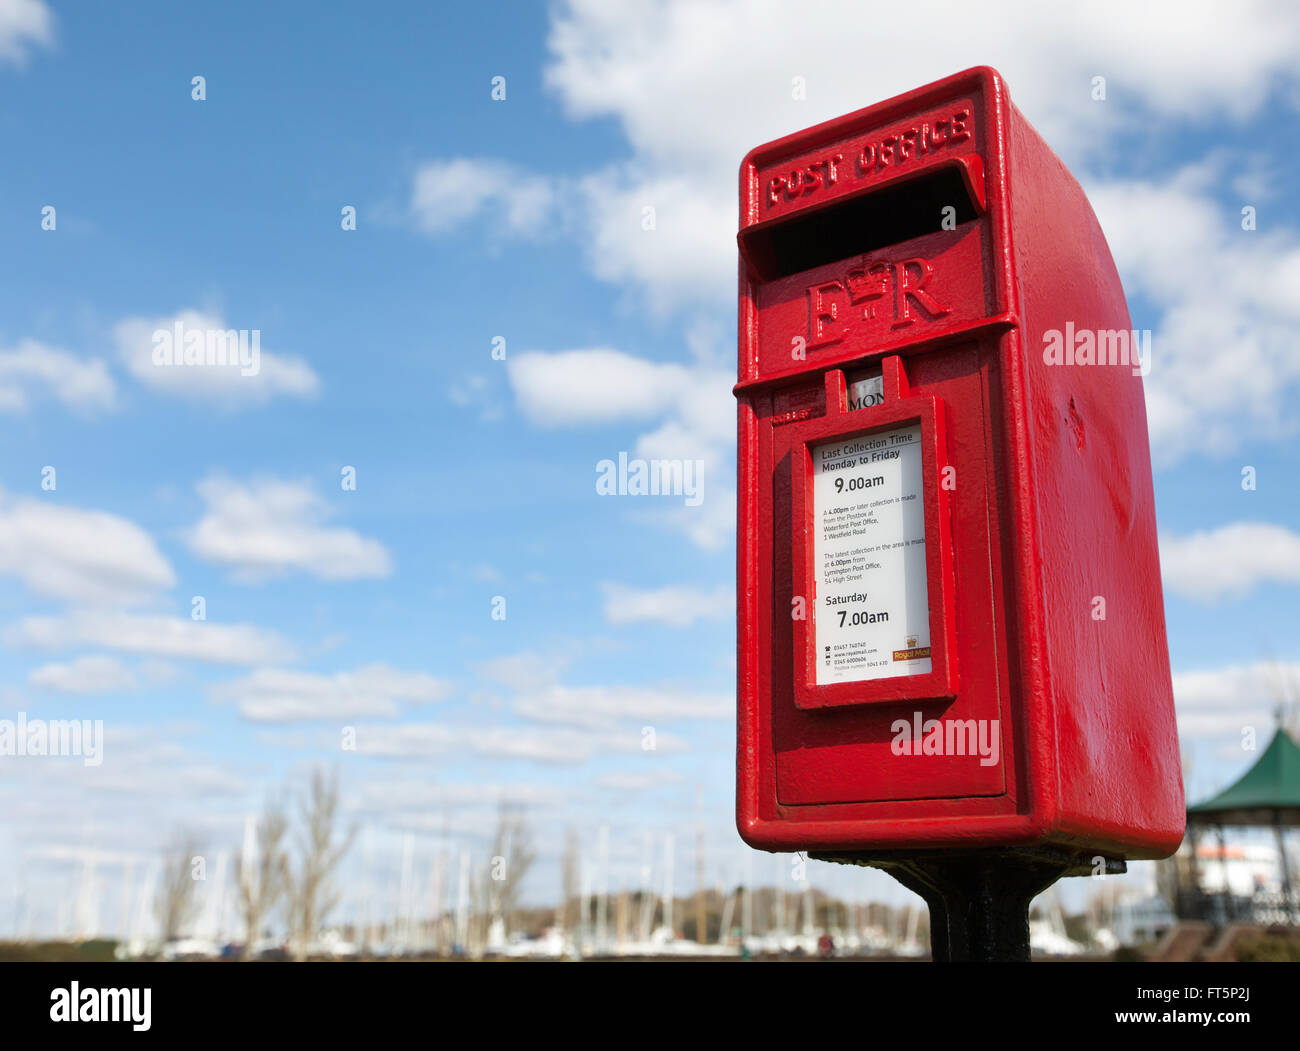 A red postbox pictured against a blue cloudy sky Stock Photo